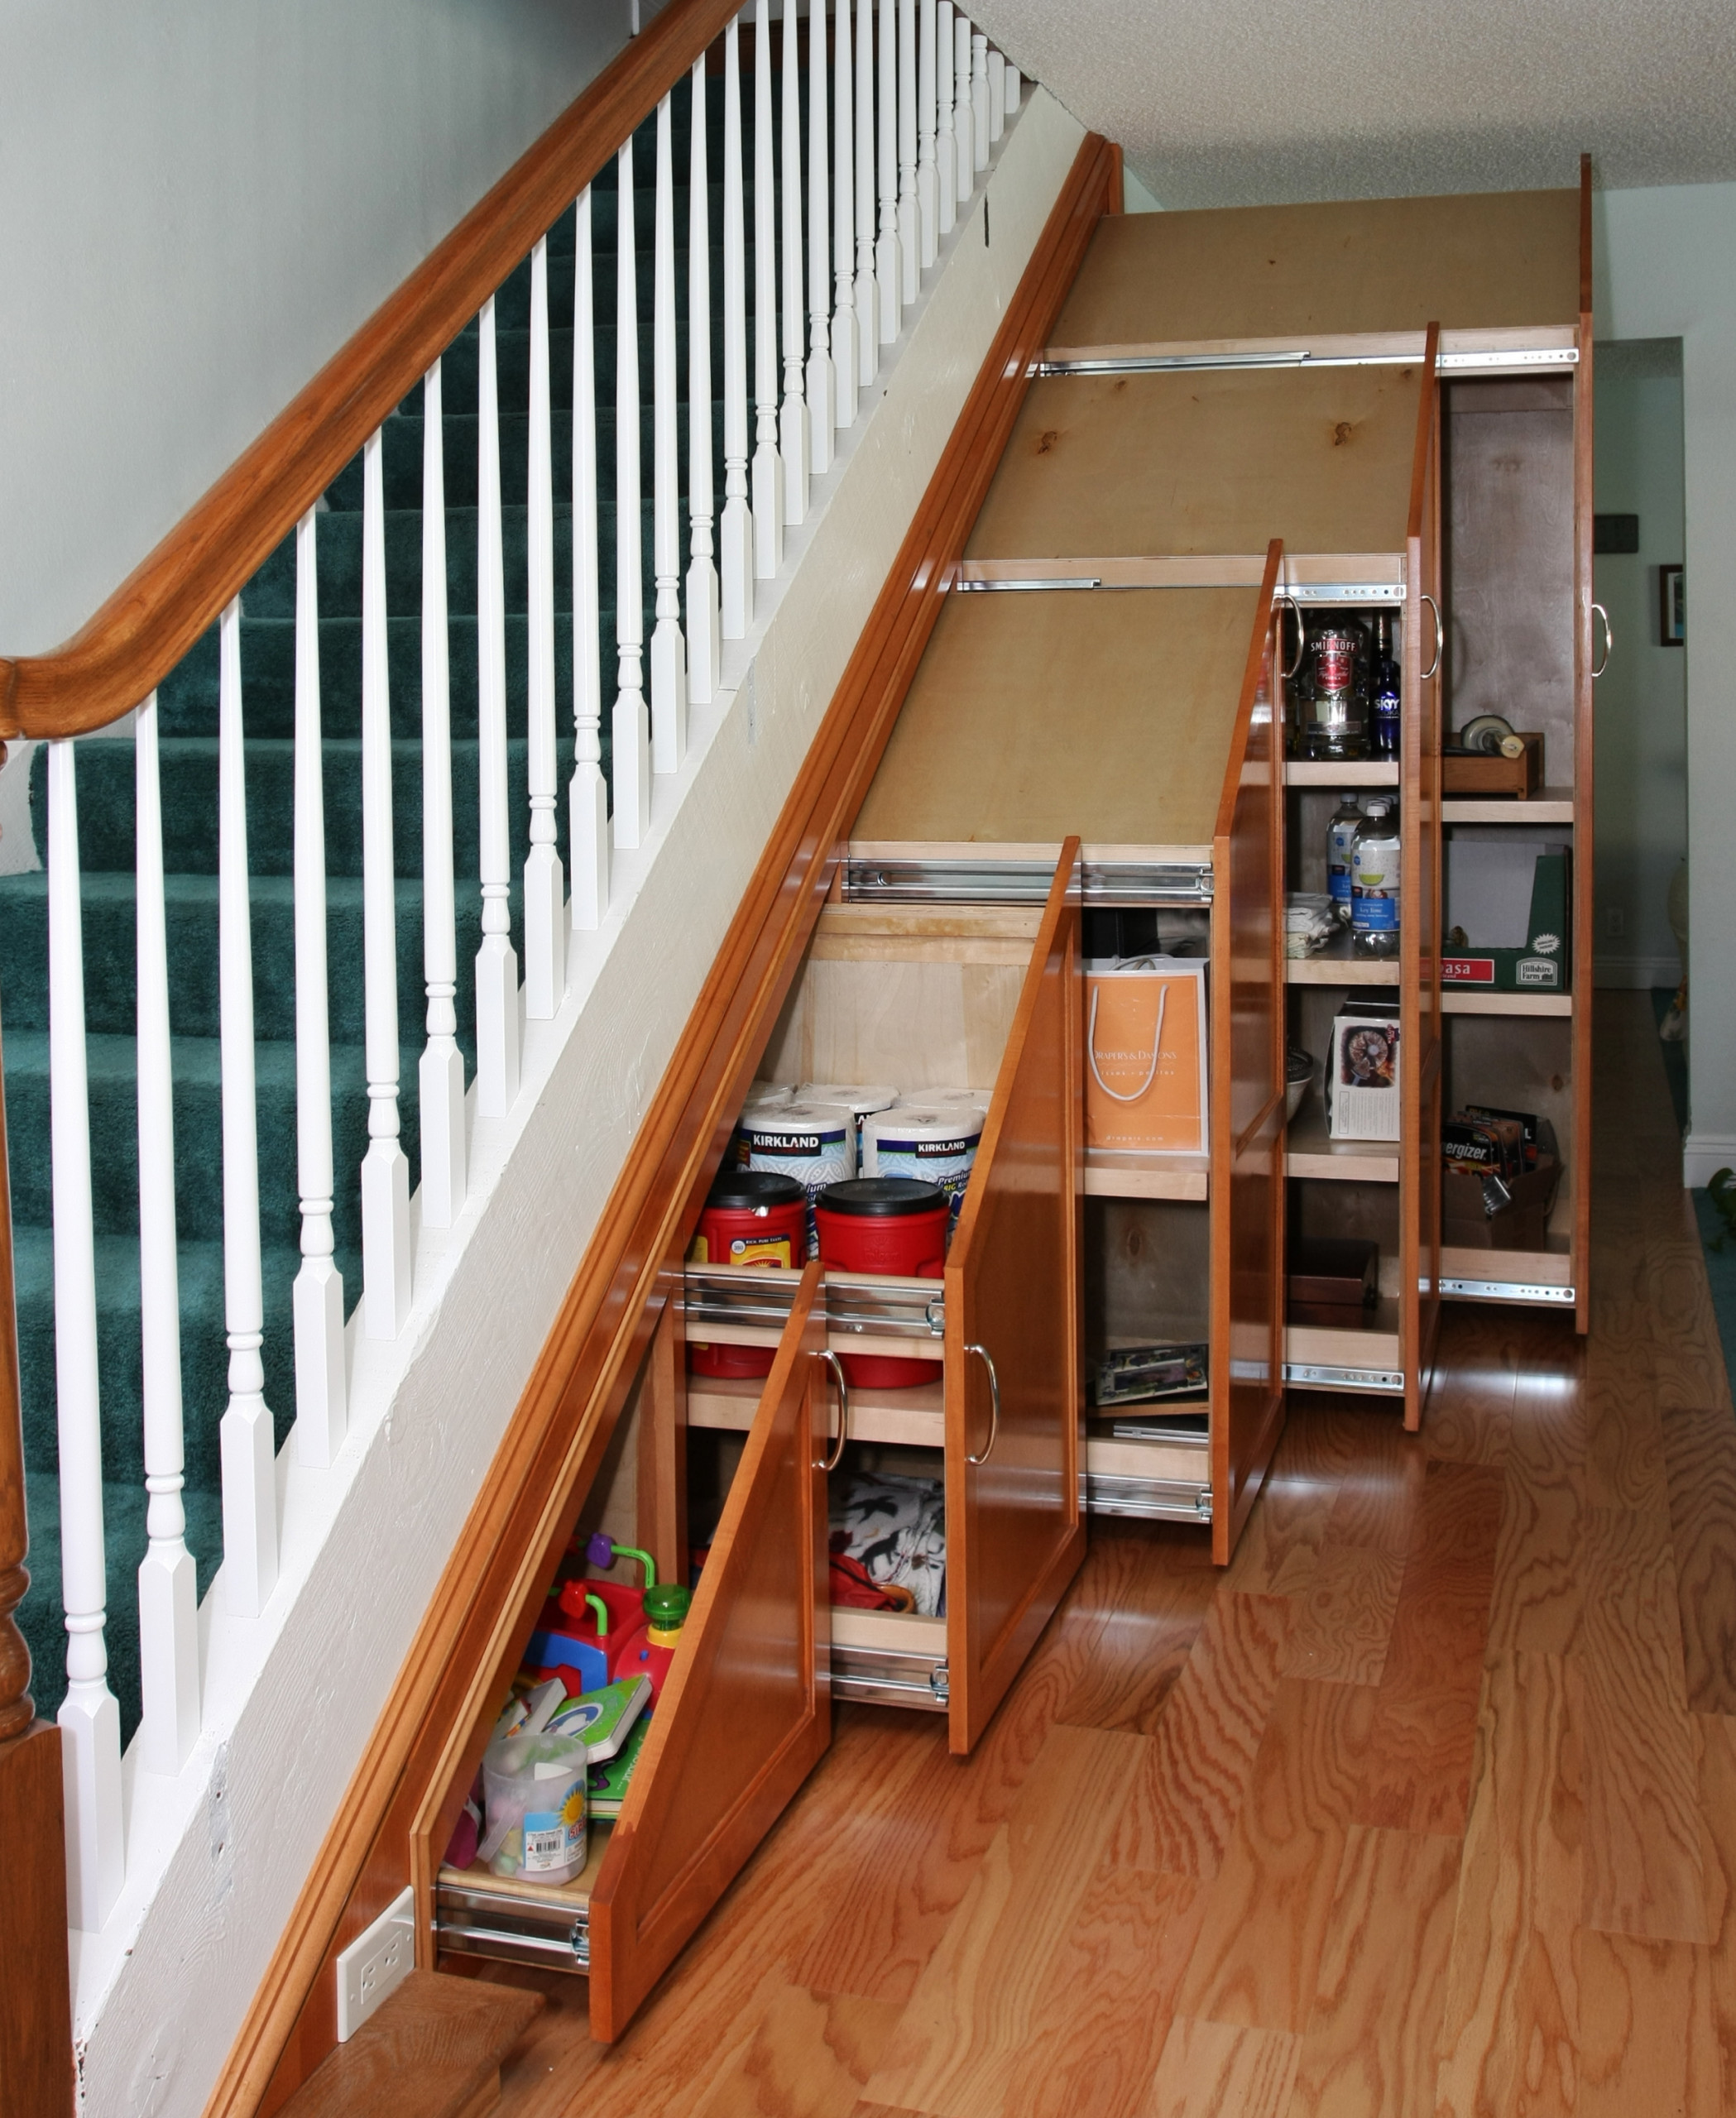 Under-Stair Storage Cabinet, Woodworking Project